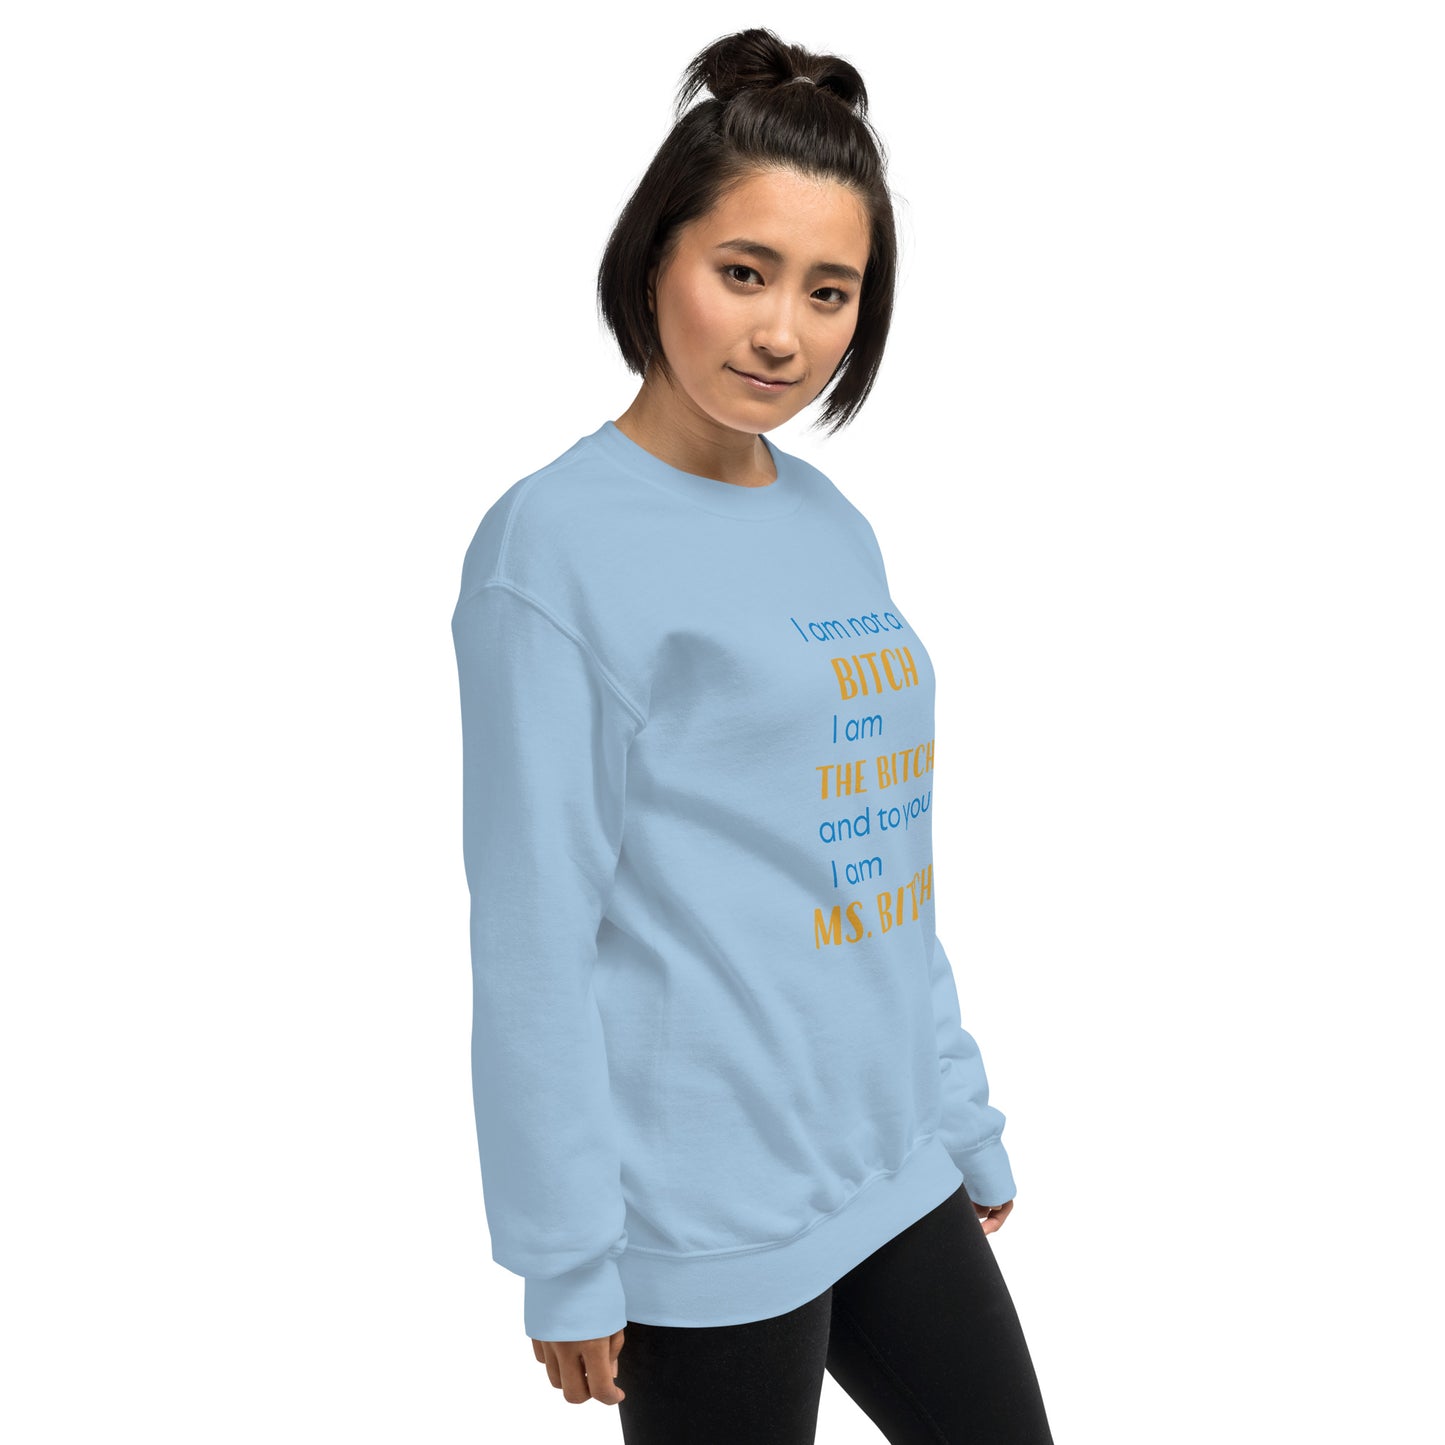 Women with light blue sweatshirt with the text "to you I'm MS bitch"